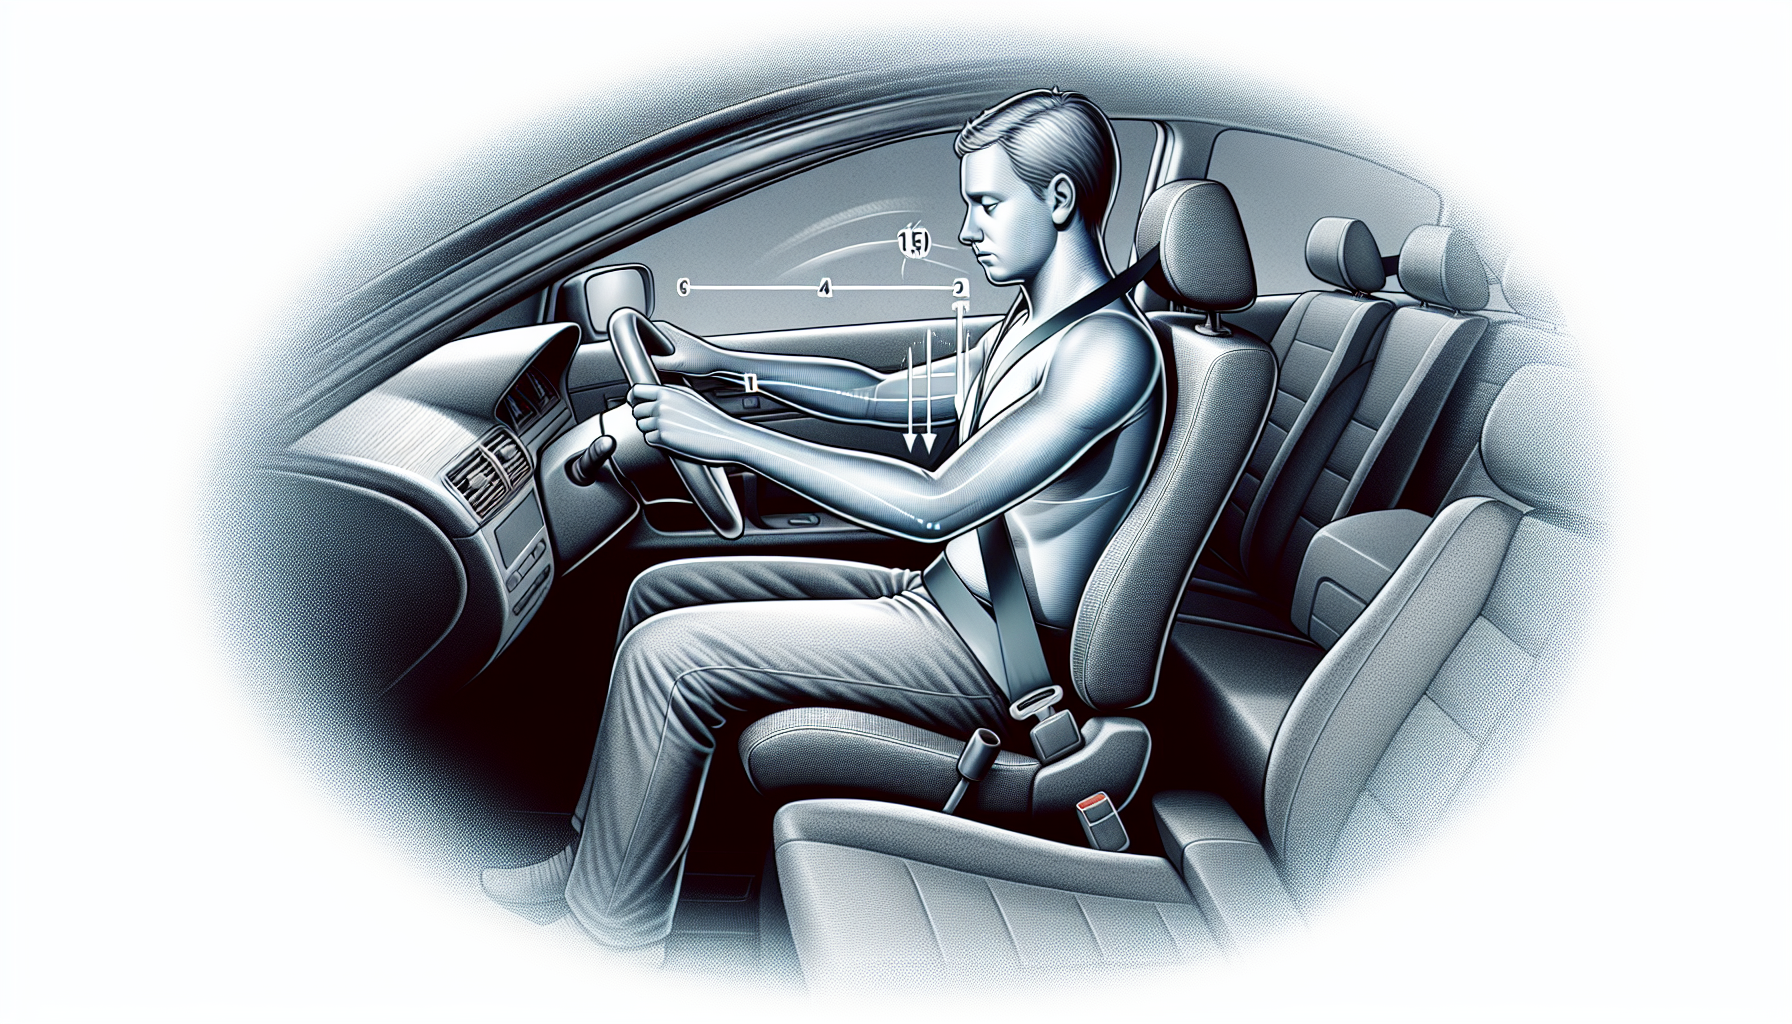 Airbag Injuries from a Car Accident